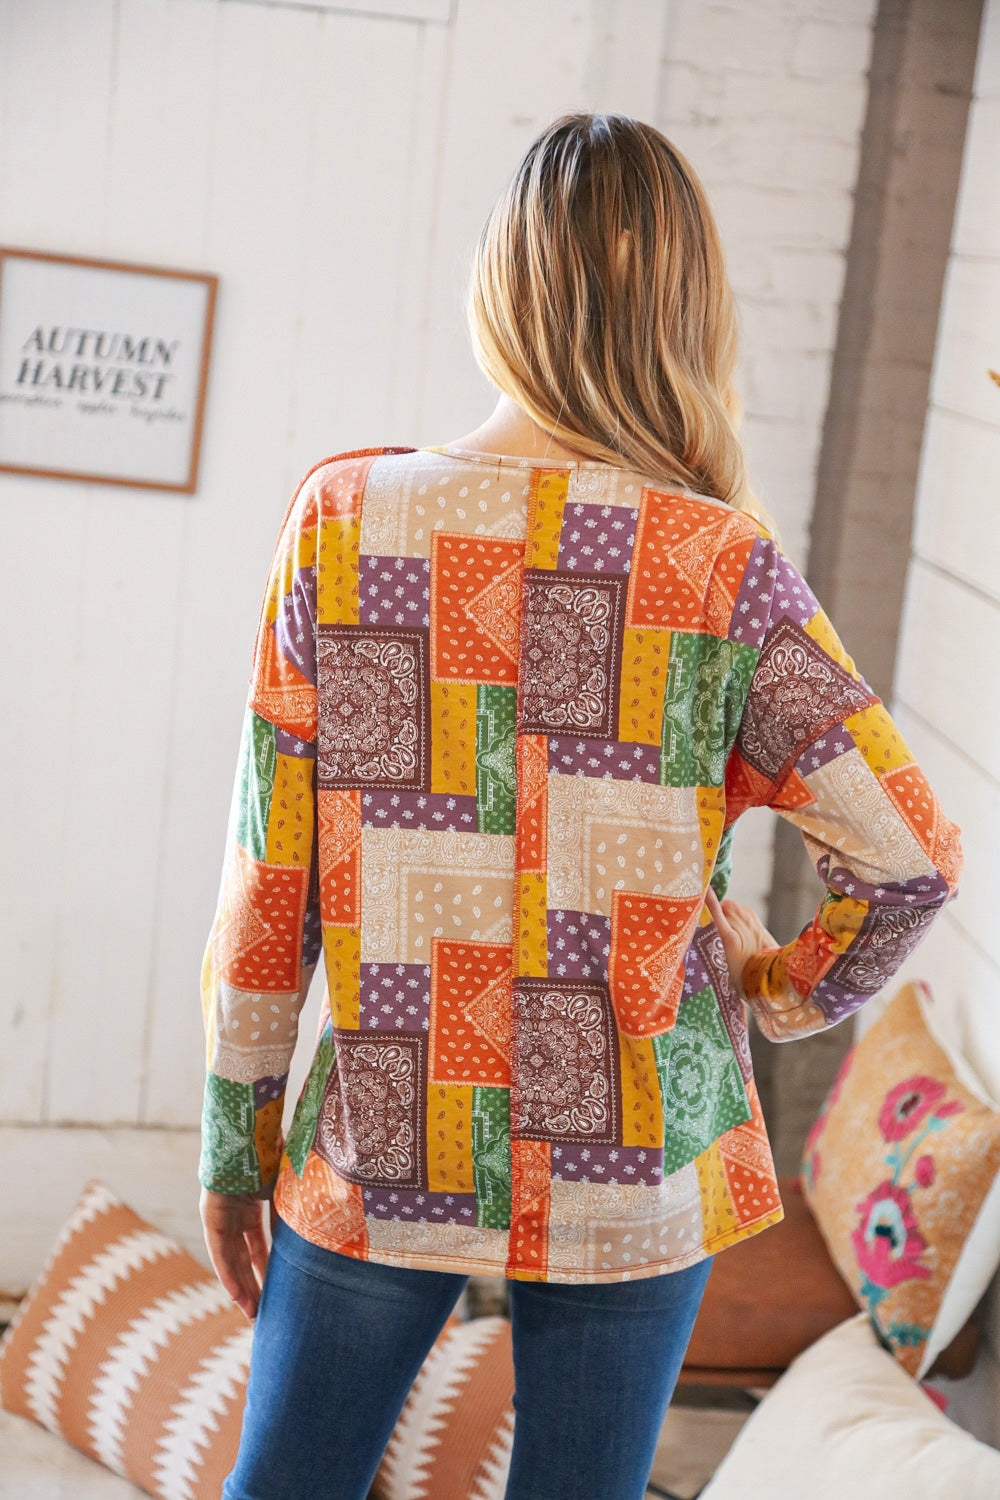 Multicolor Patchwork Button Down Terry Outseam Top Haptics